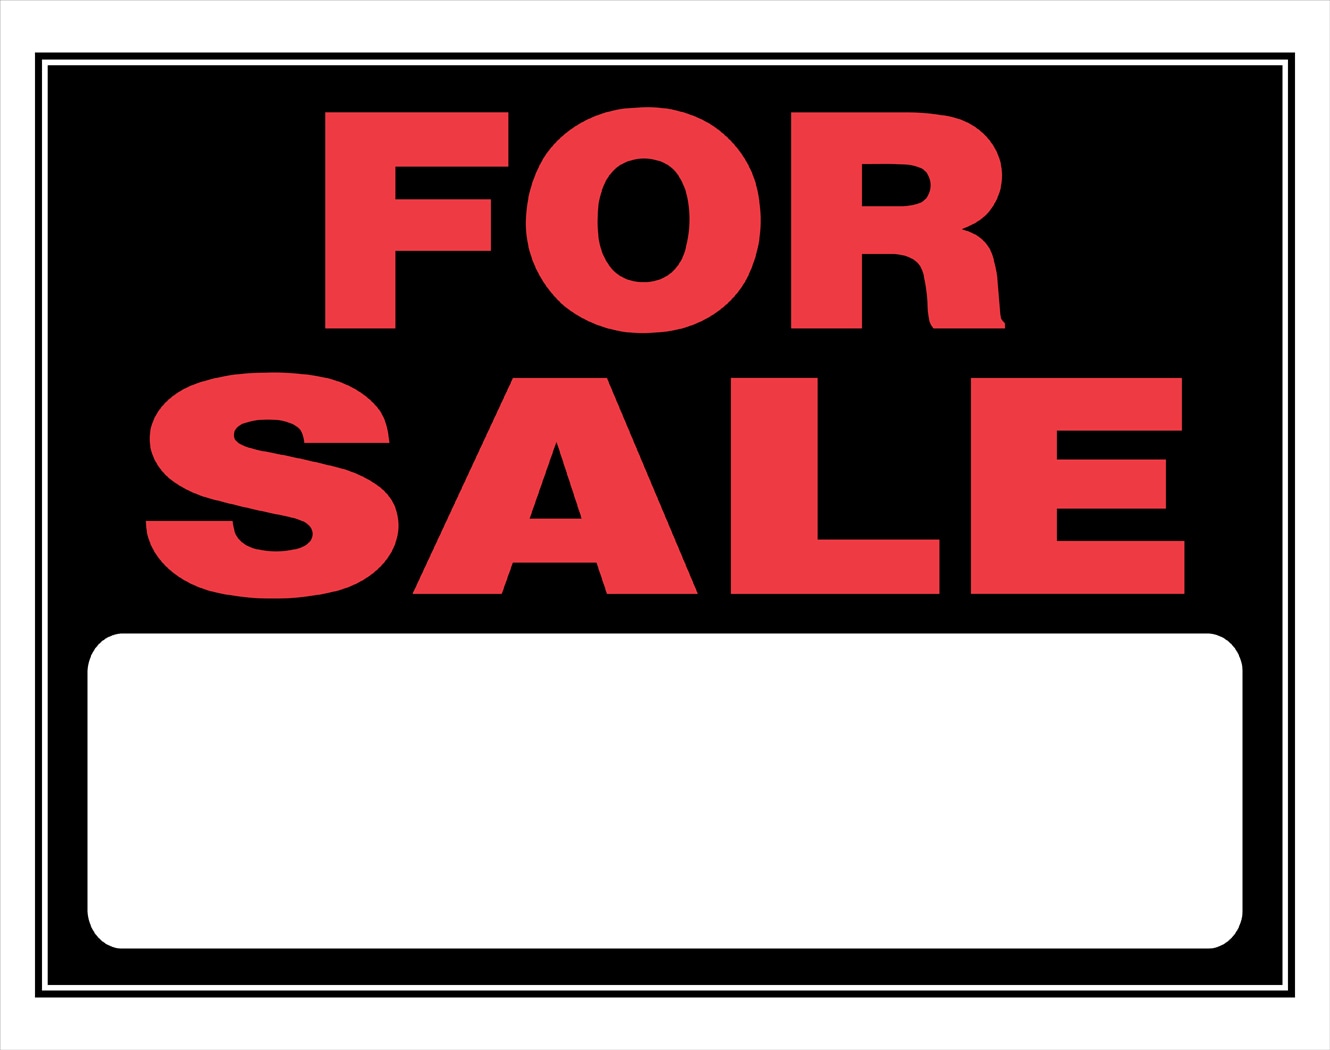 Hillman 15-in x 19-in Plastic Sale/For Sale Sign